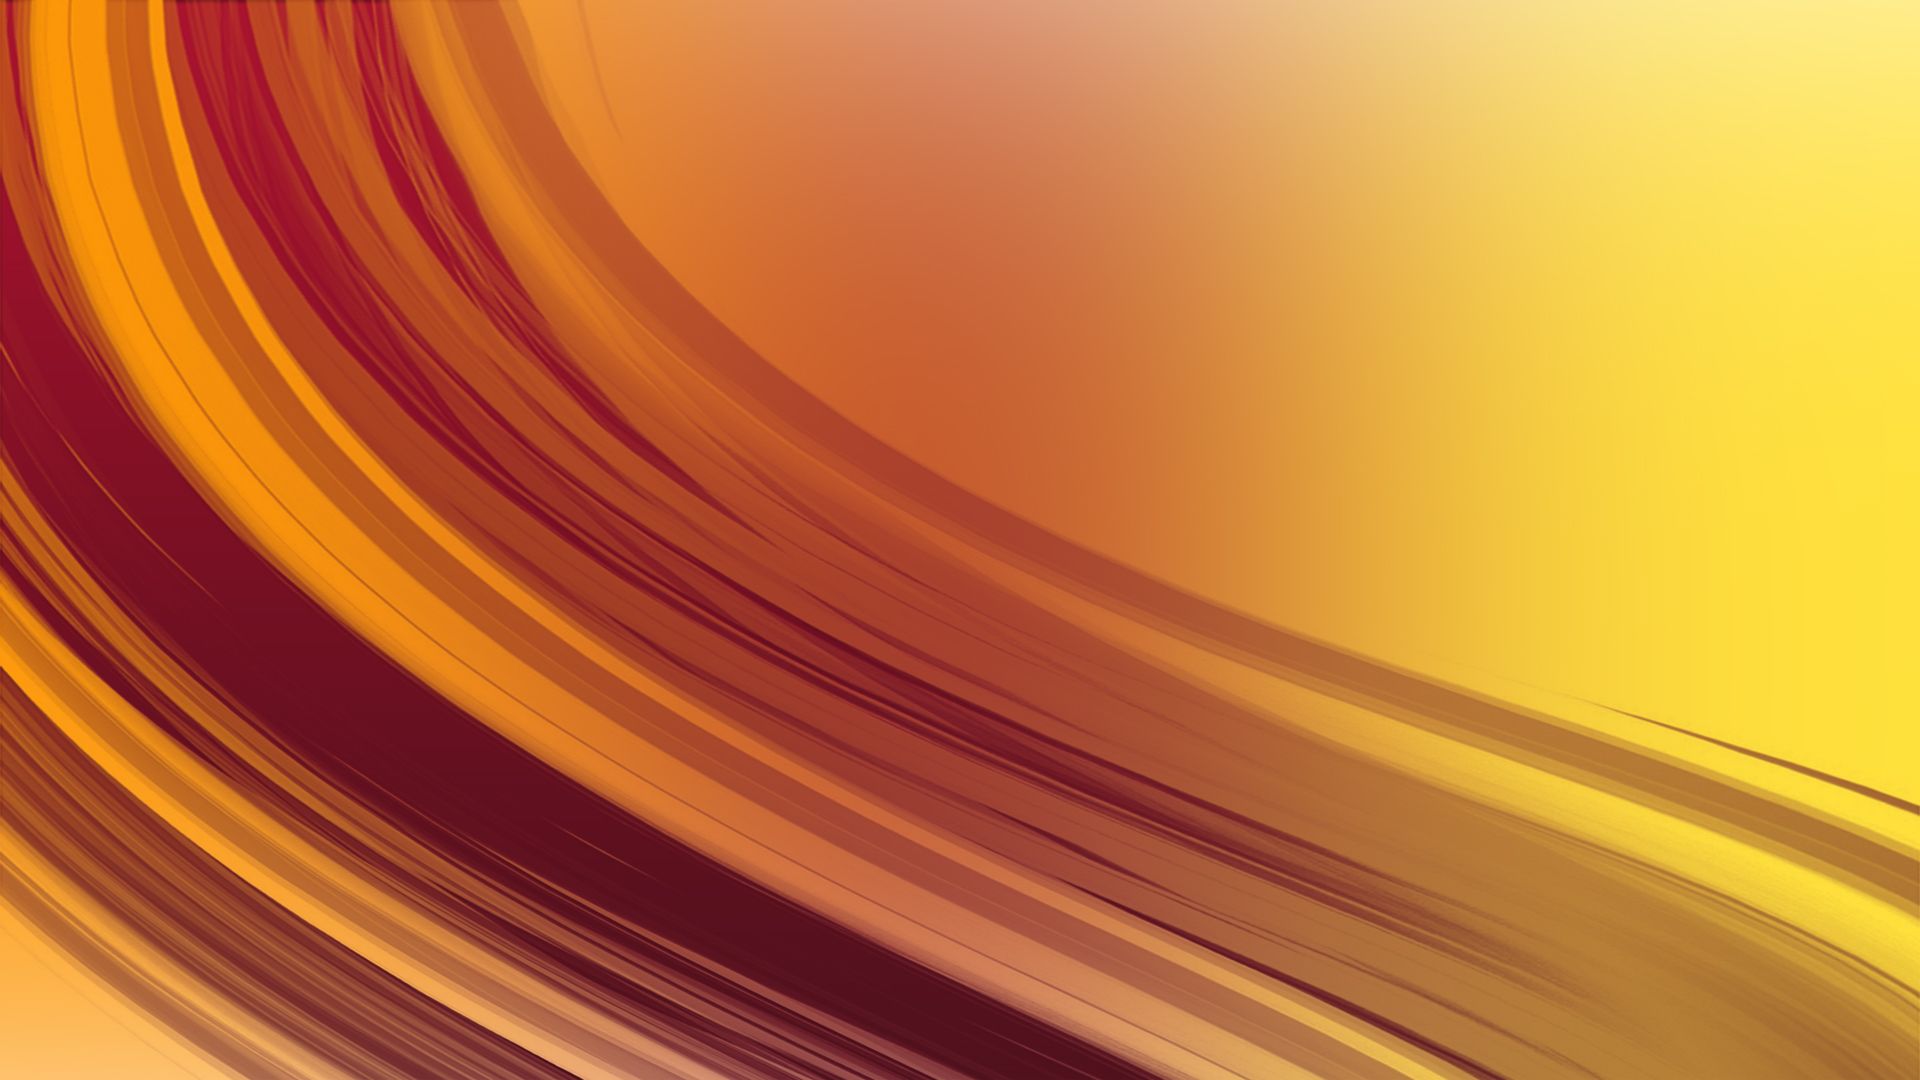 Wallpaper, abstract, wavy lines 1920x1080